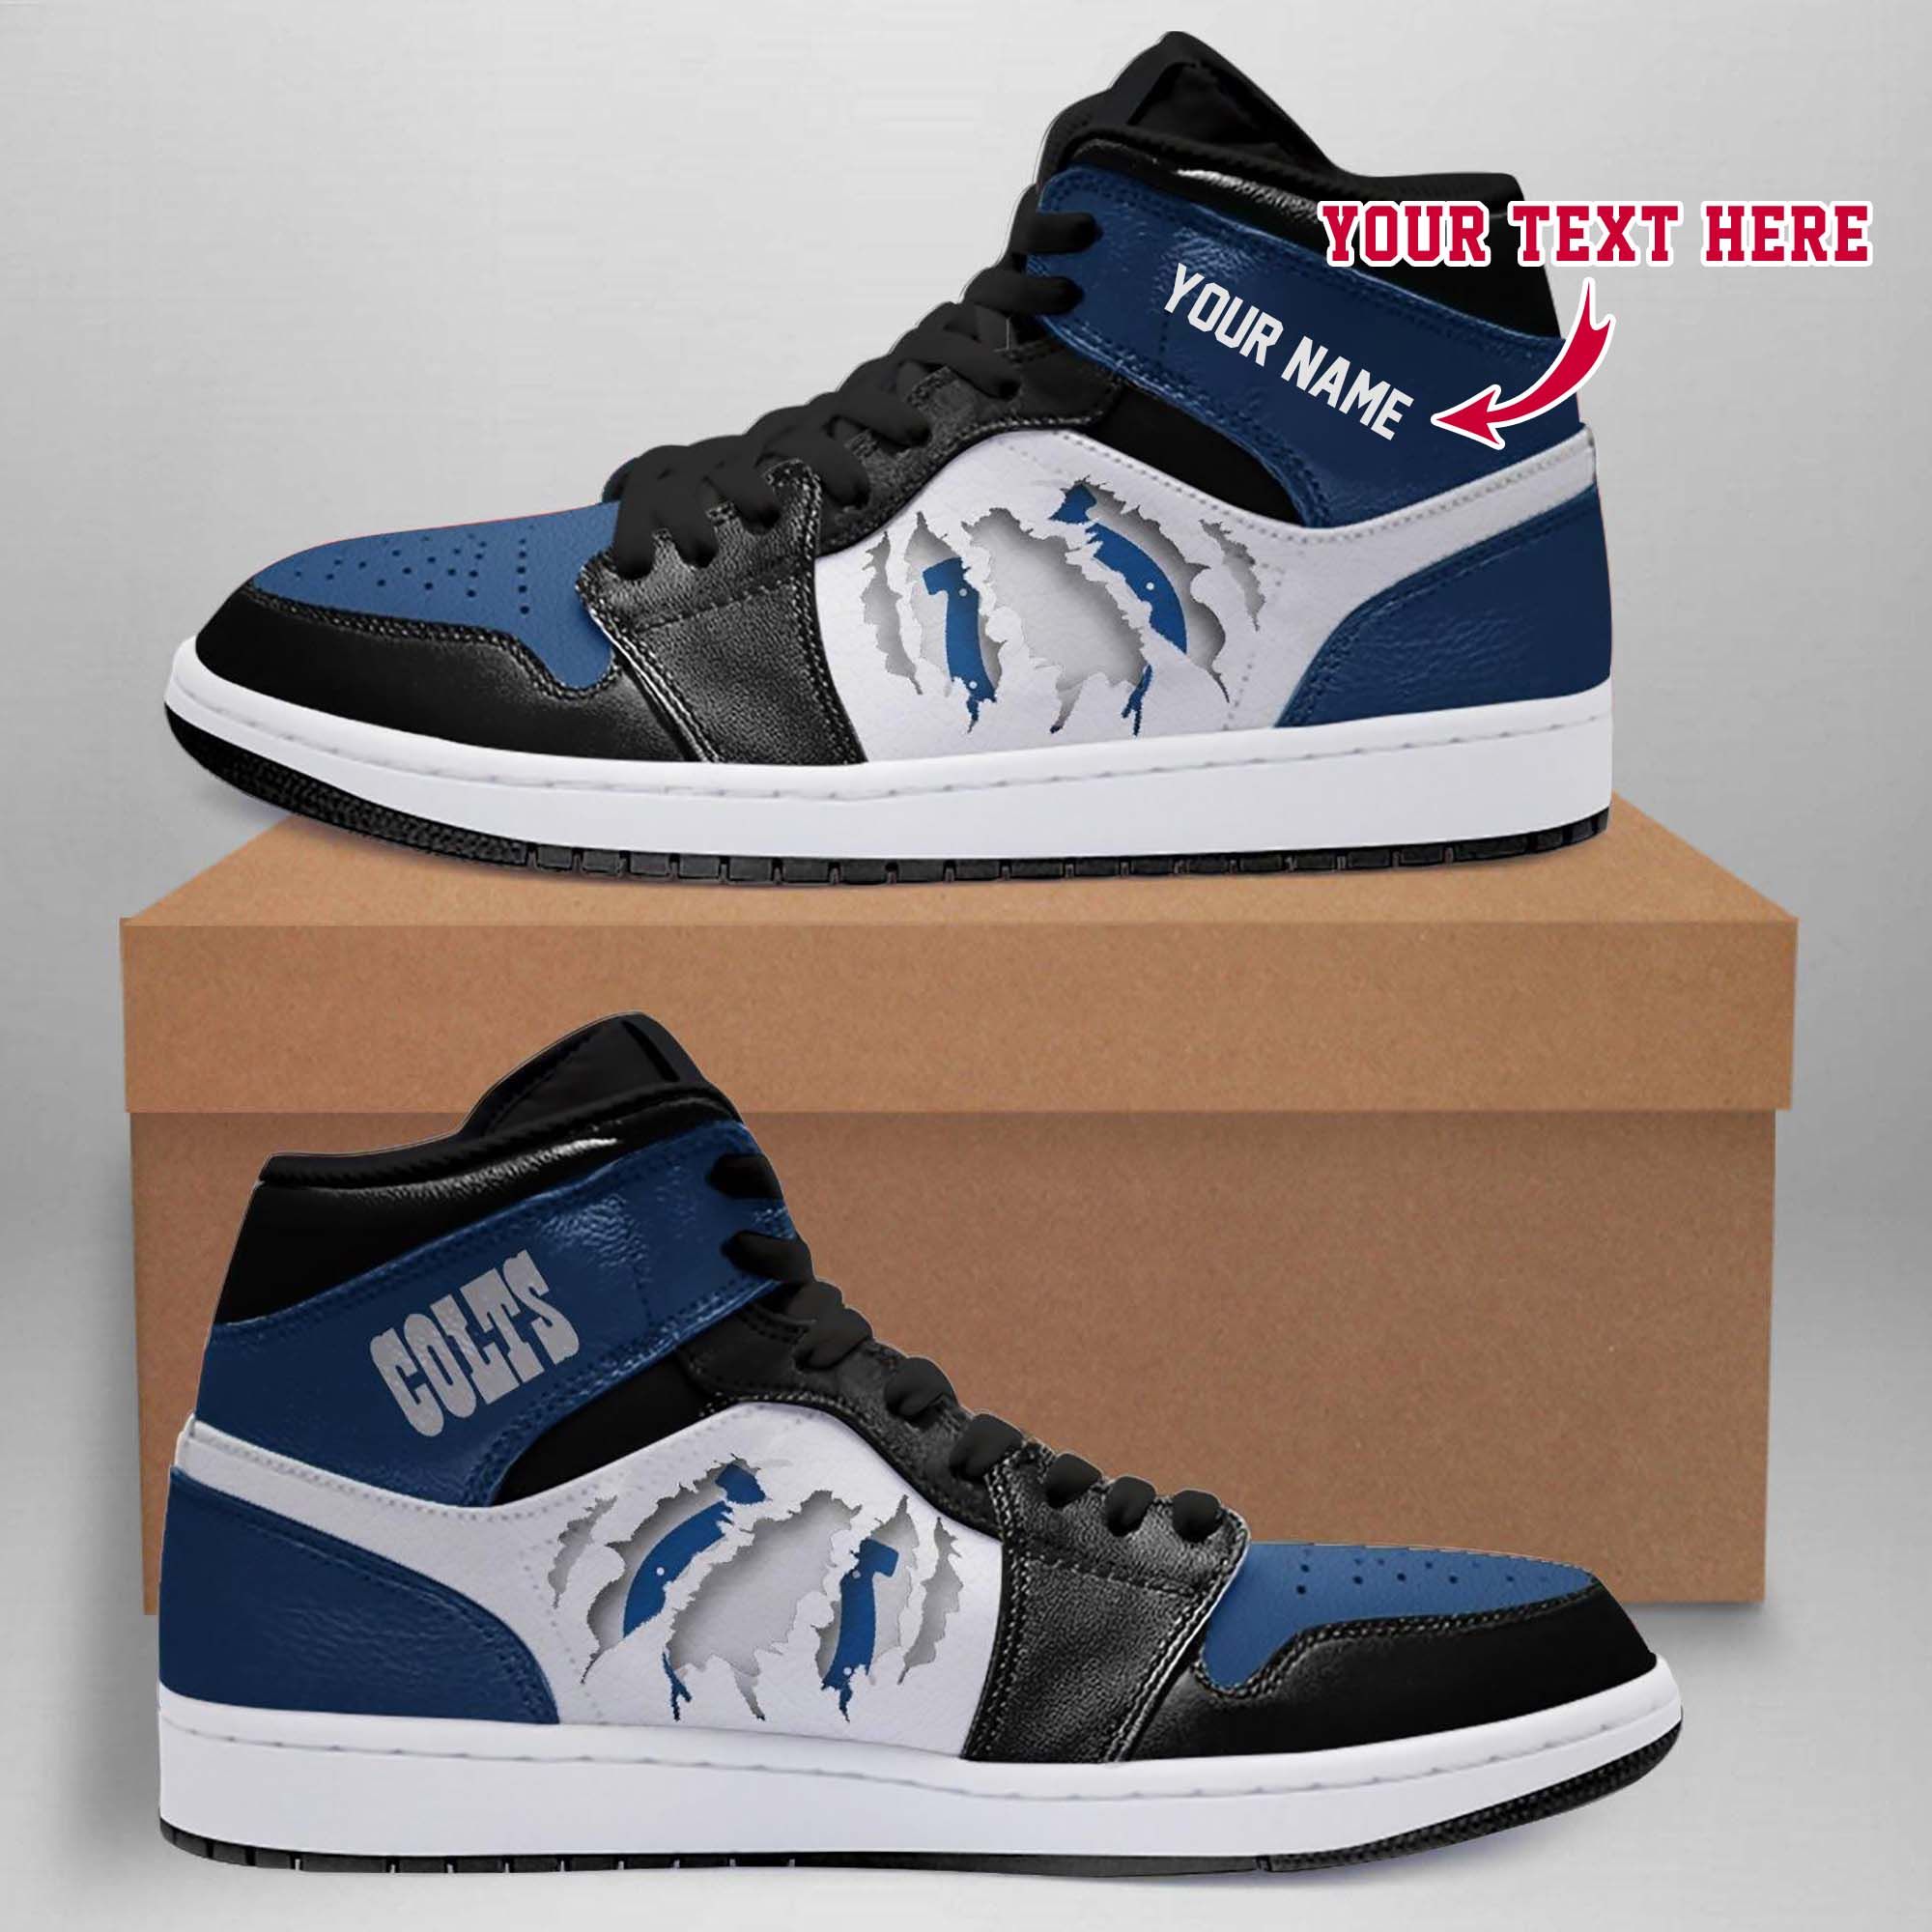 INDIANAPOLIS COLTS I2 NFL Football High Retro Air Force Jordan 1 Customized Shoes